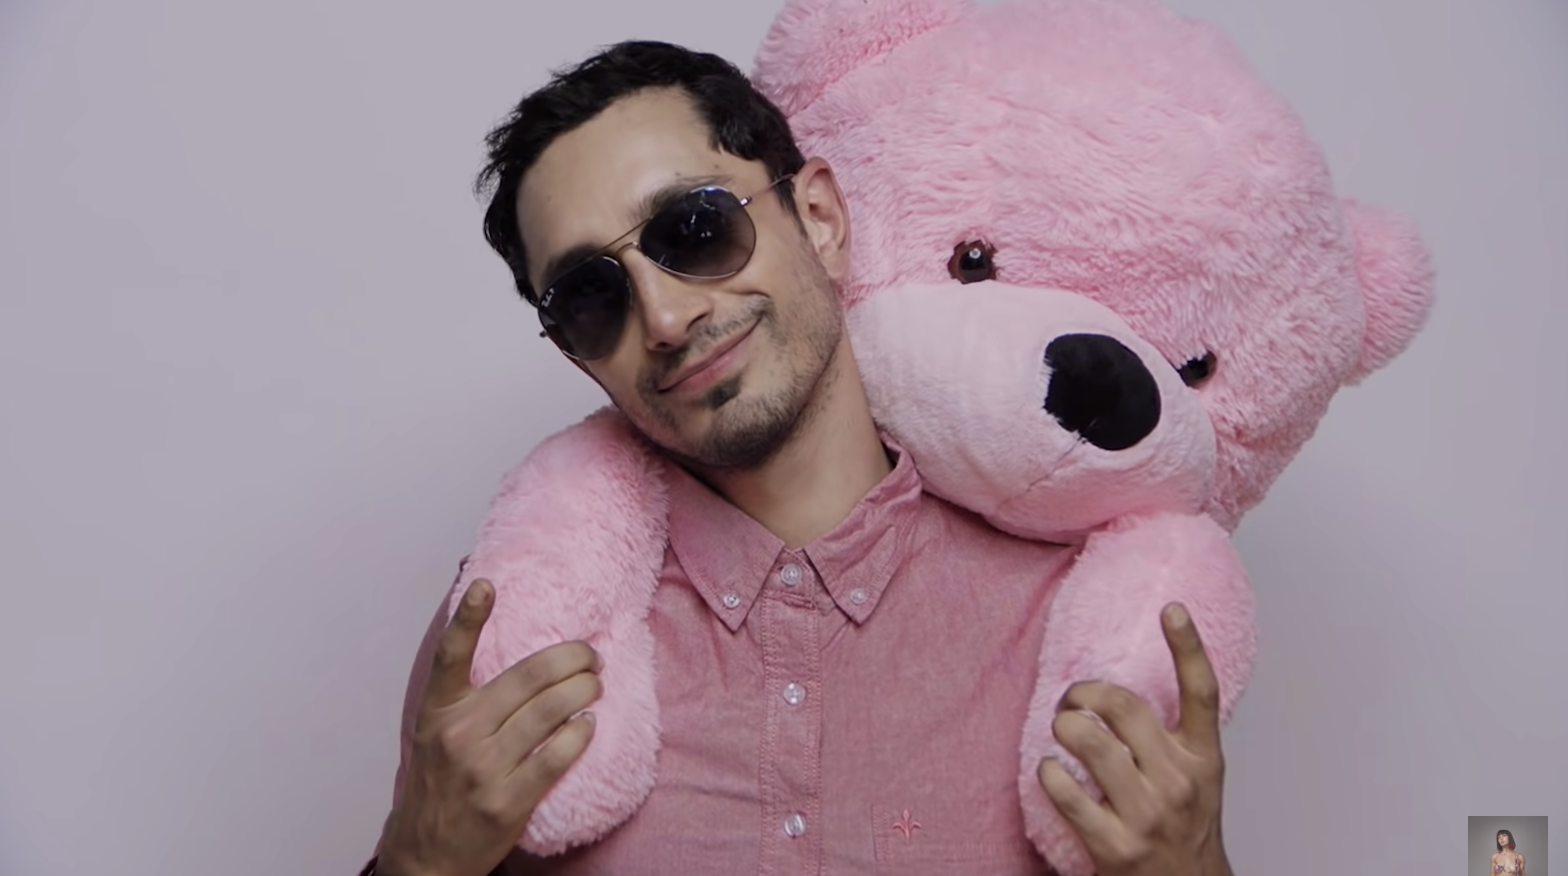 Riz holding a pink teddy bear on his back piggy-back style. 